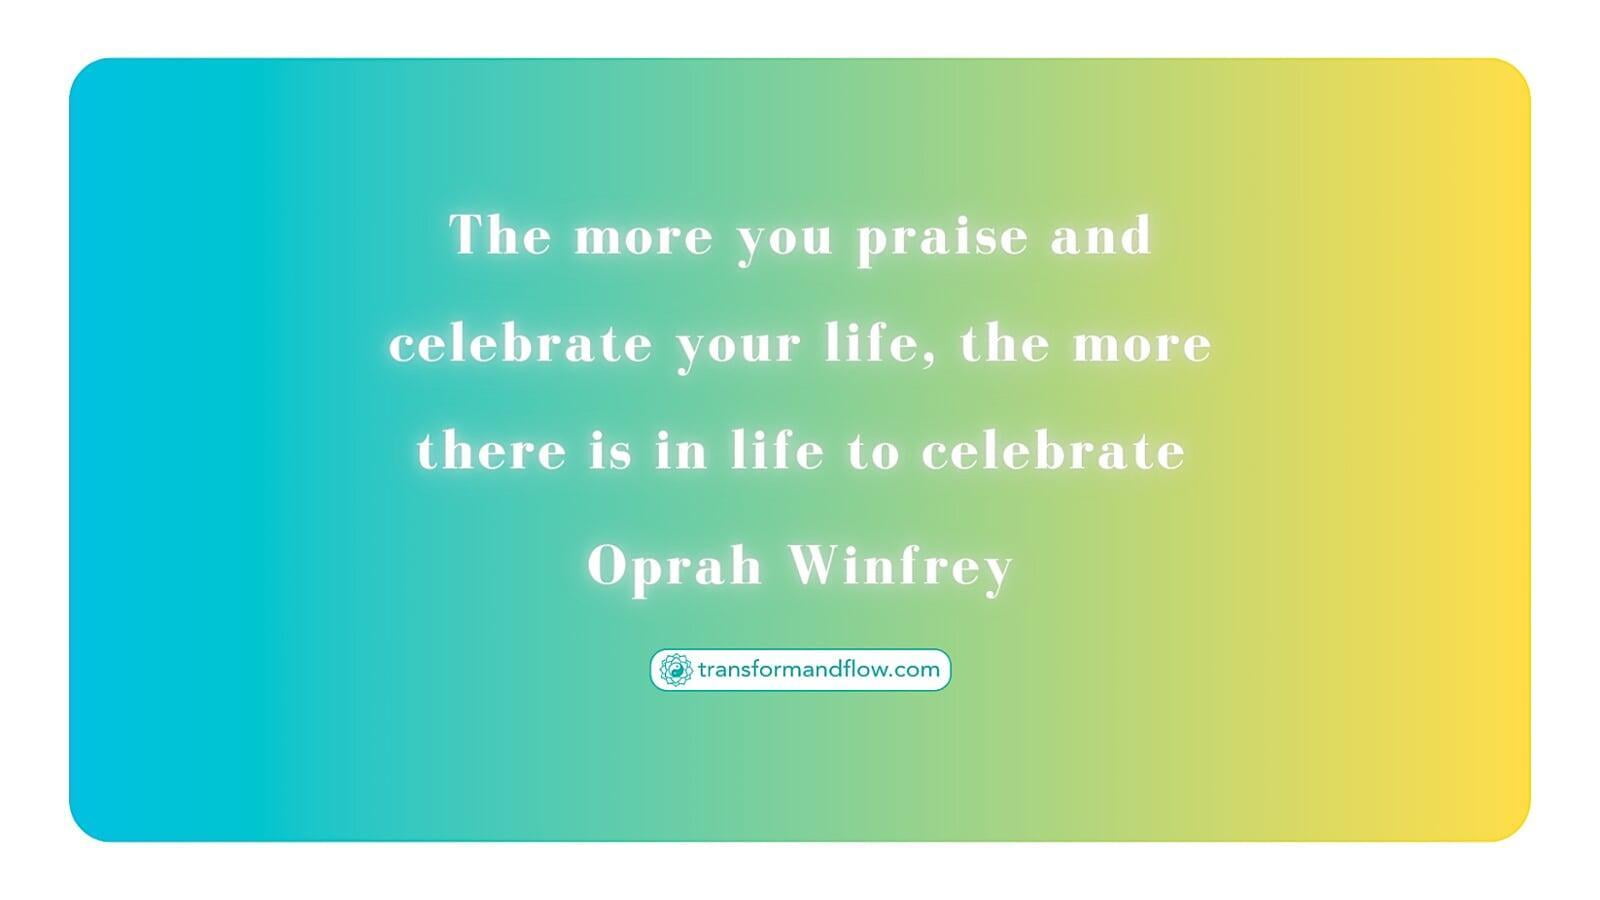 Praise and Celebrate Your Life!